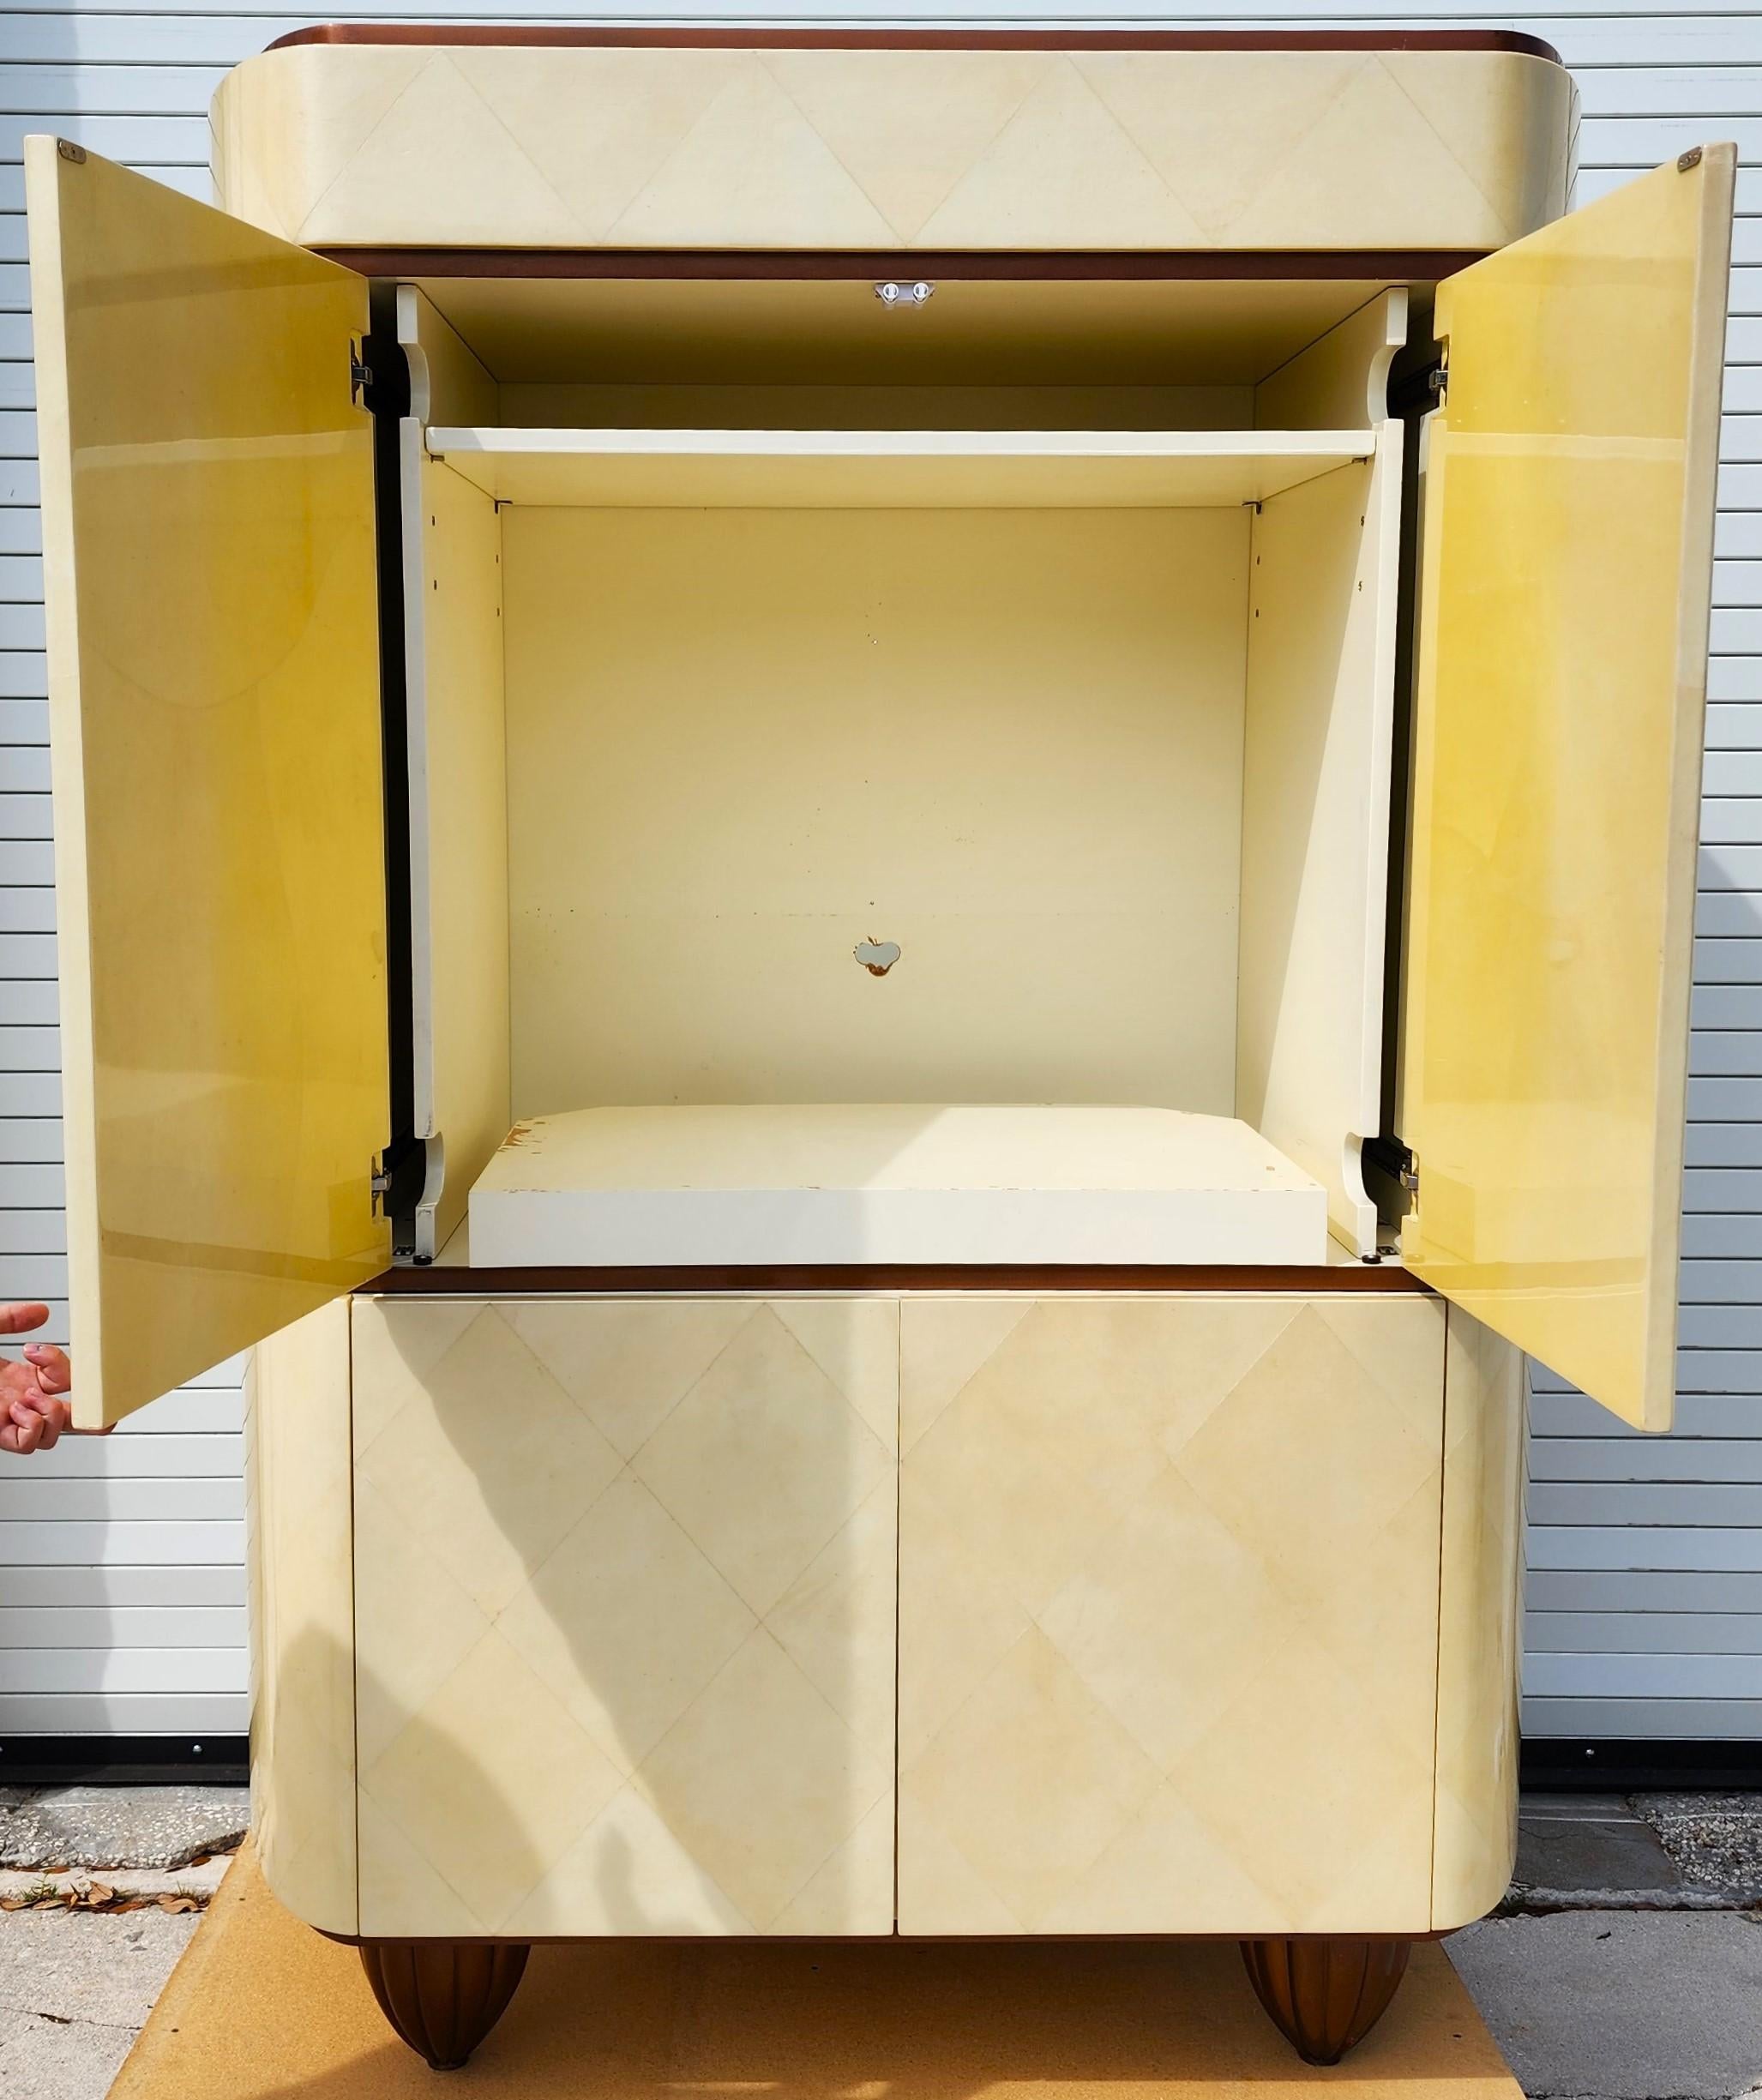 For FULL item description click on CONTINUE READING at the bottom of this page.

Offering One Of Our Recent Palm Beach Estate Fine Furniture Acquisitions Of A
Huge Vintage Dry Bar Cabinet Custom Made by Jimeco
Featuring bleached Goatskin leather